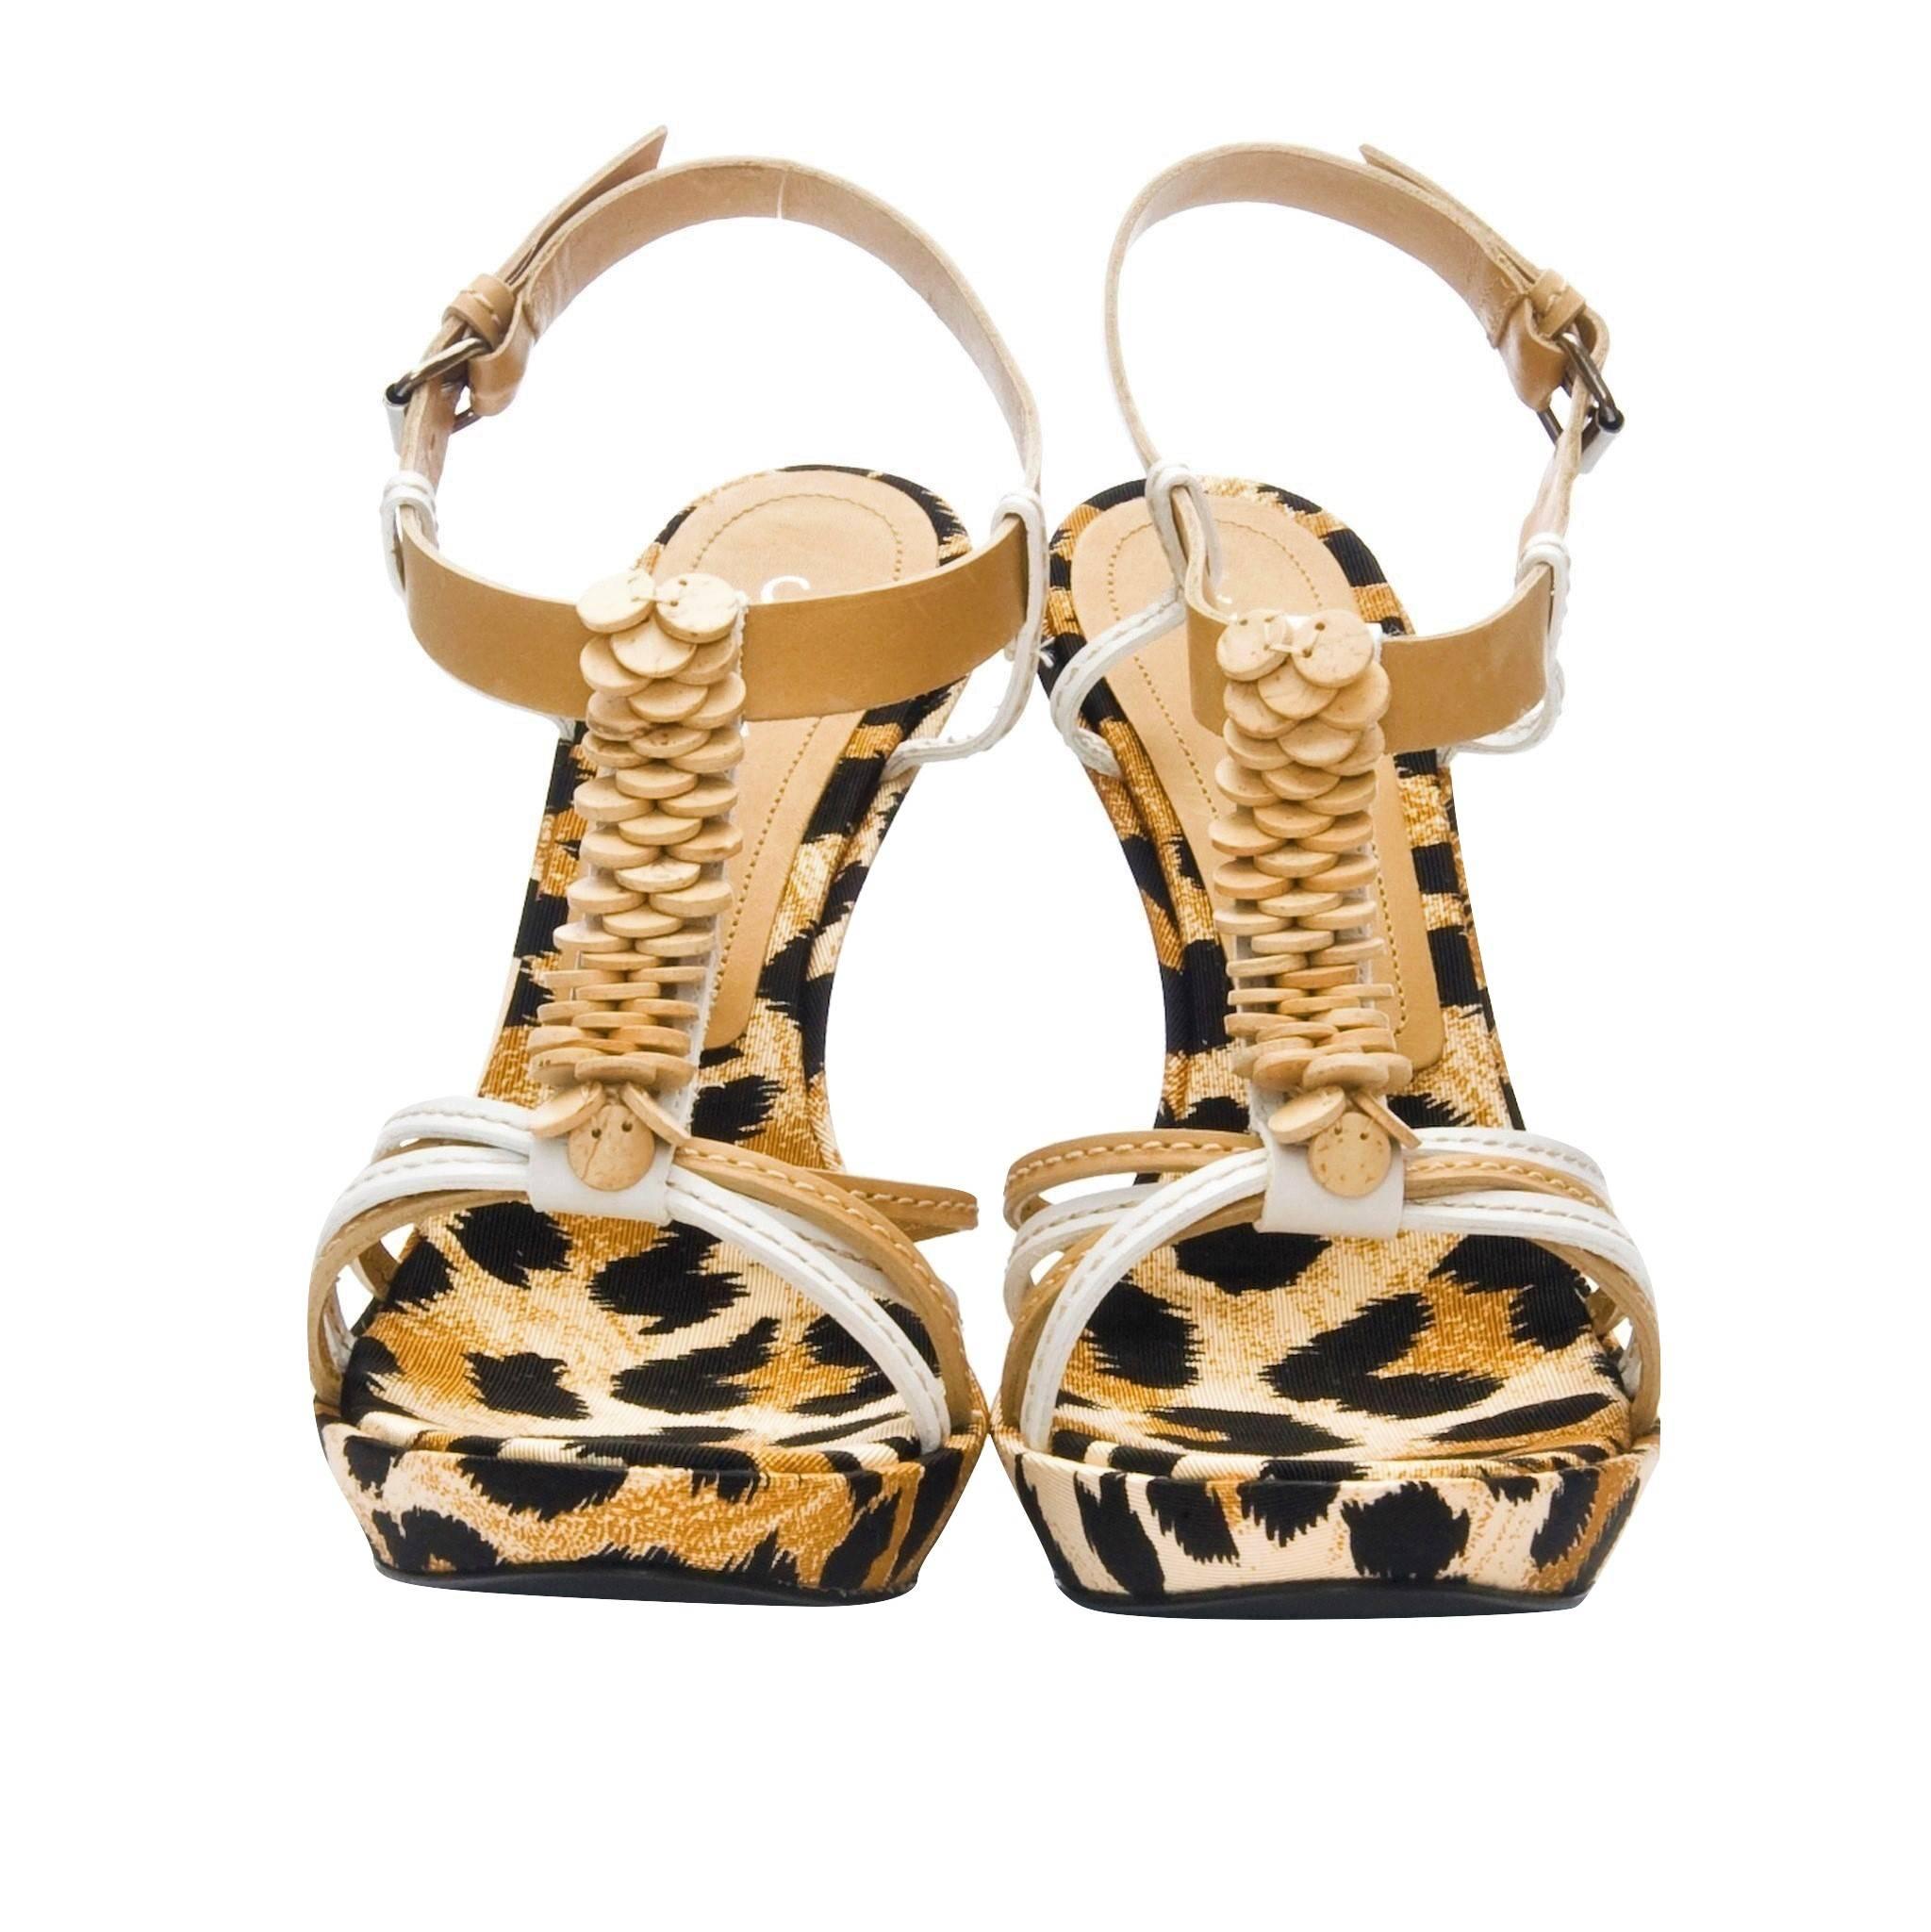 Casadei Leopard Platforms
Brand New
Please Note: We feel these run a half size small.  
* Cream, Brown & Black Leopard Print
* Fabric Leopard Print Footbed
* Beige & White Leather Straps
* Wood Detail T Front
* 1/2